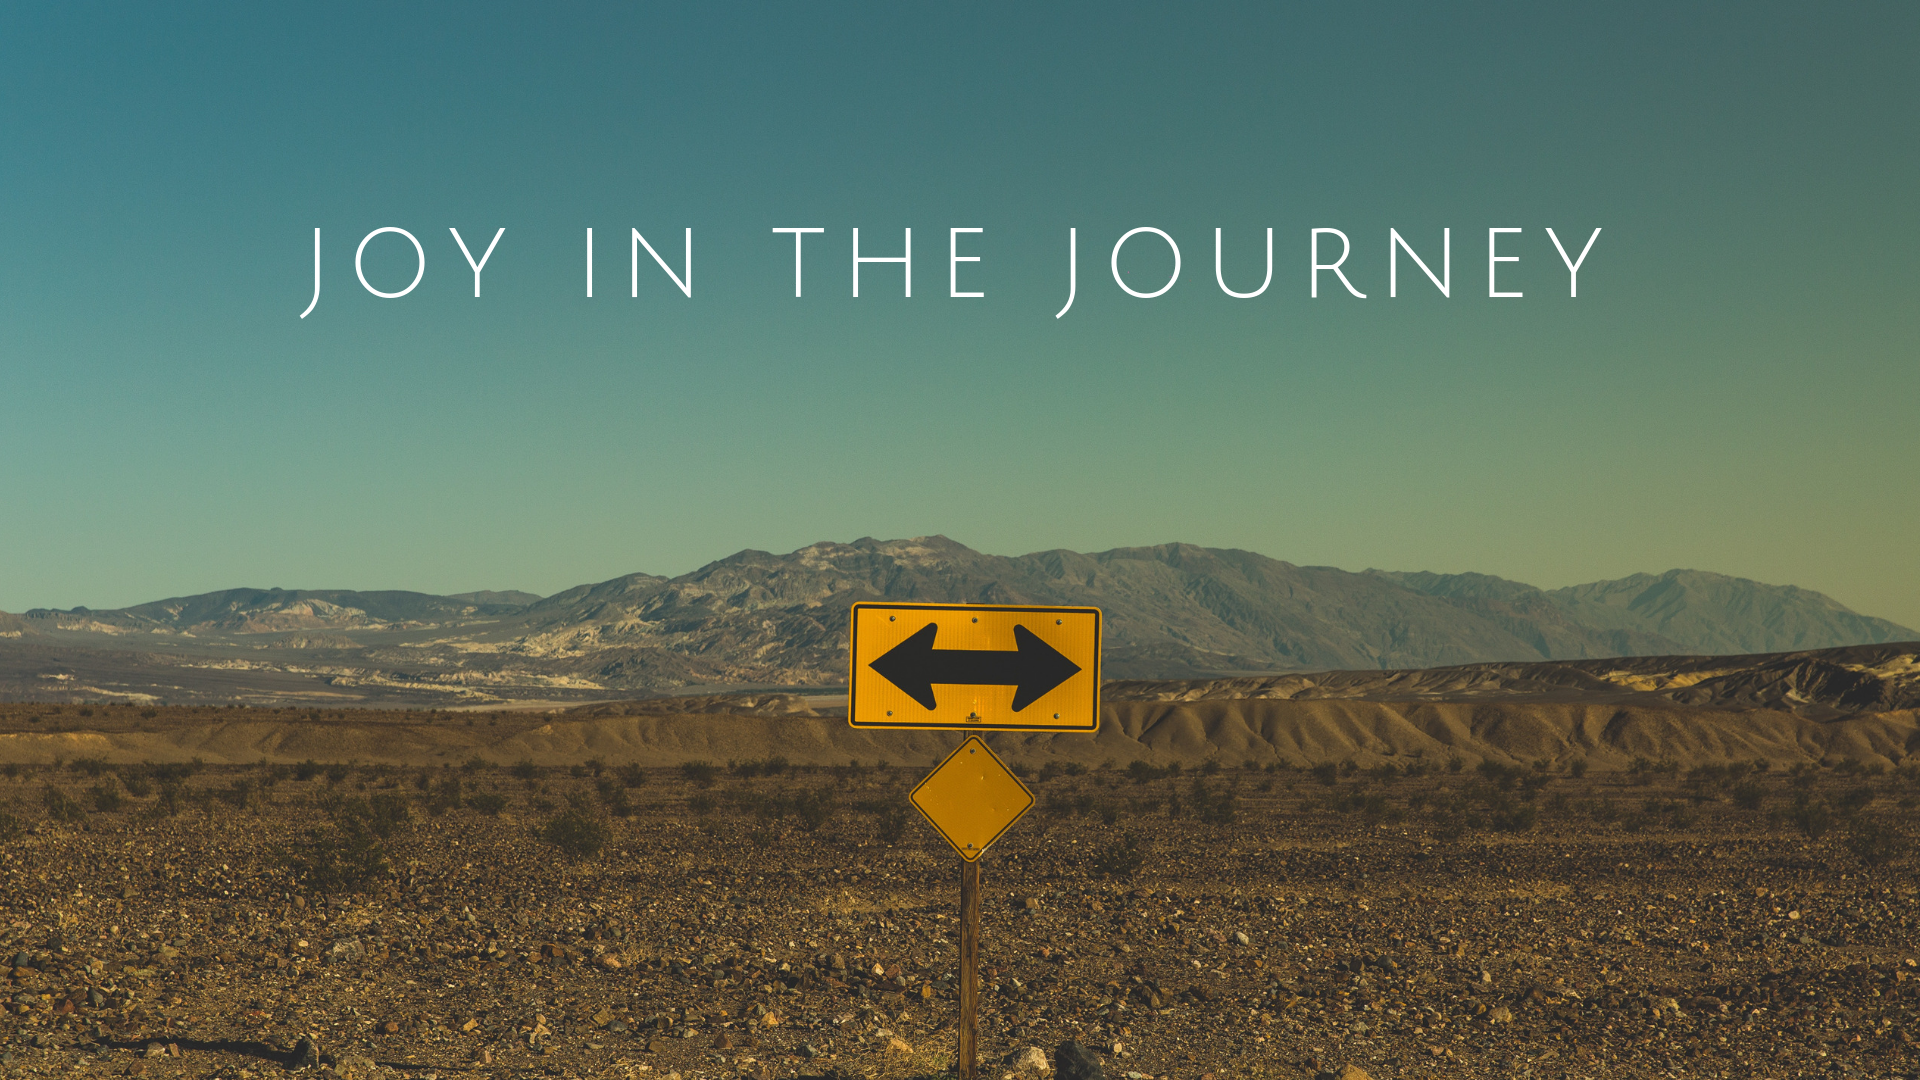 Joy in the Journey: Don't worry about a thing